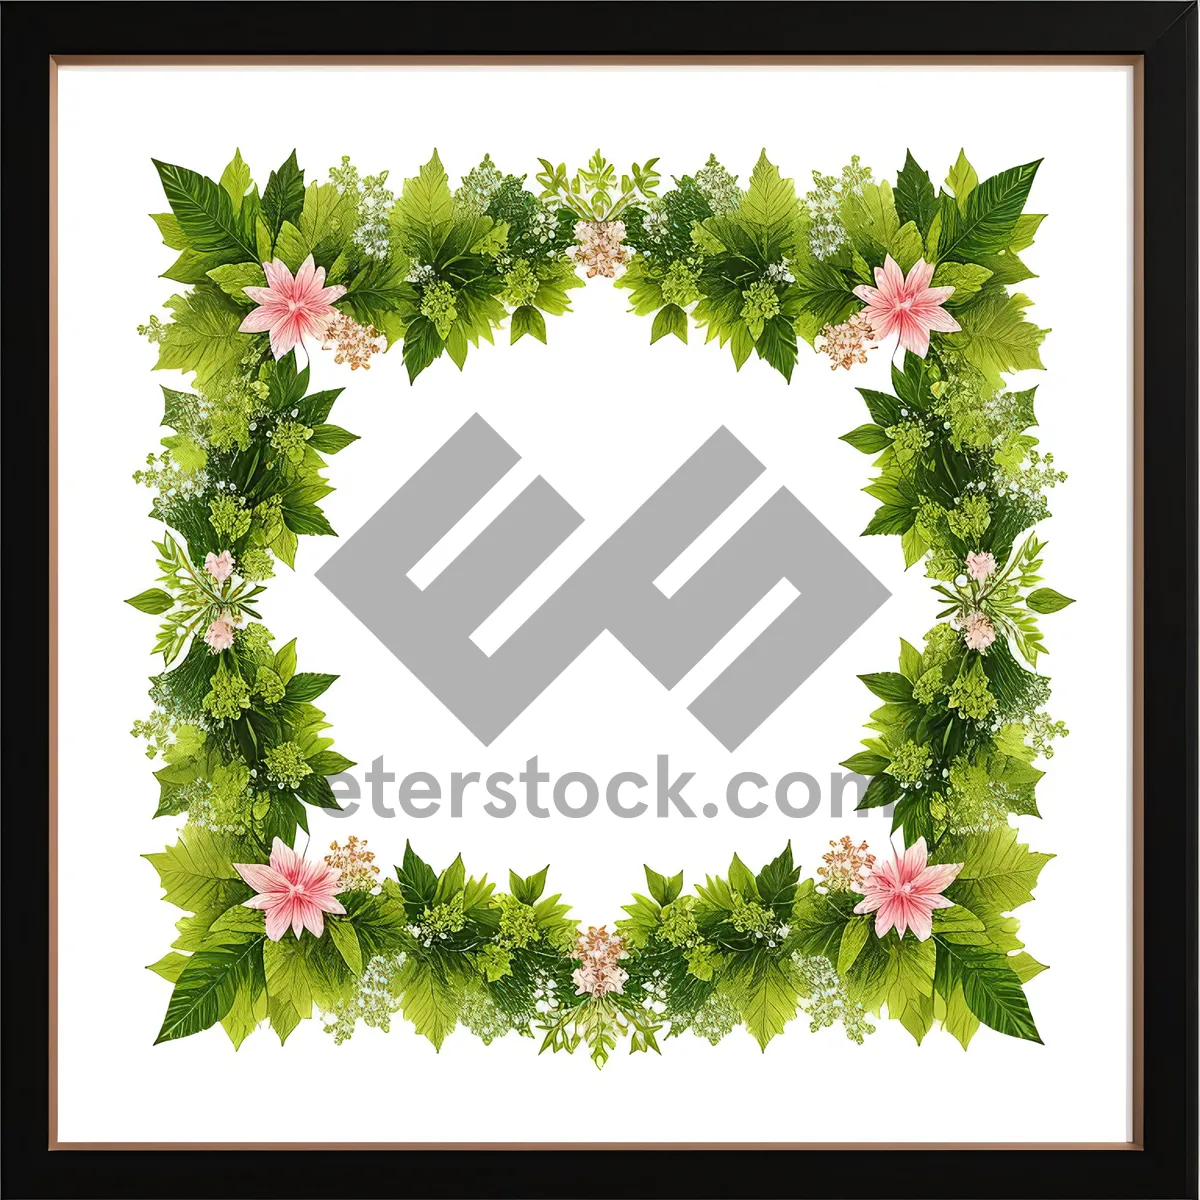 Picture of Floral Holly Card: Festive Season's Greetings